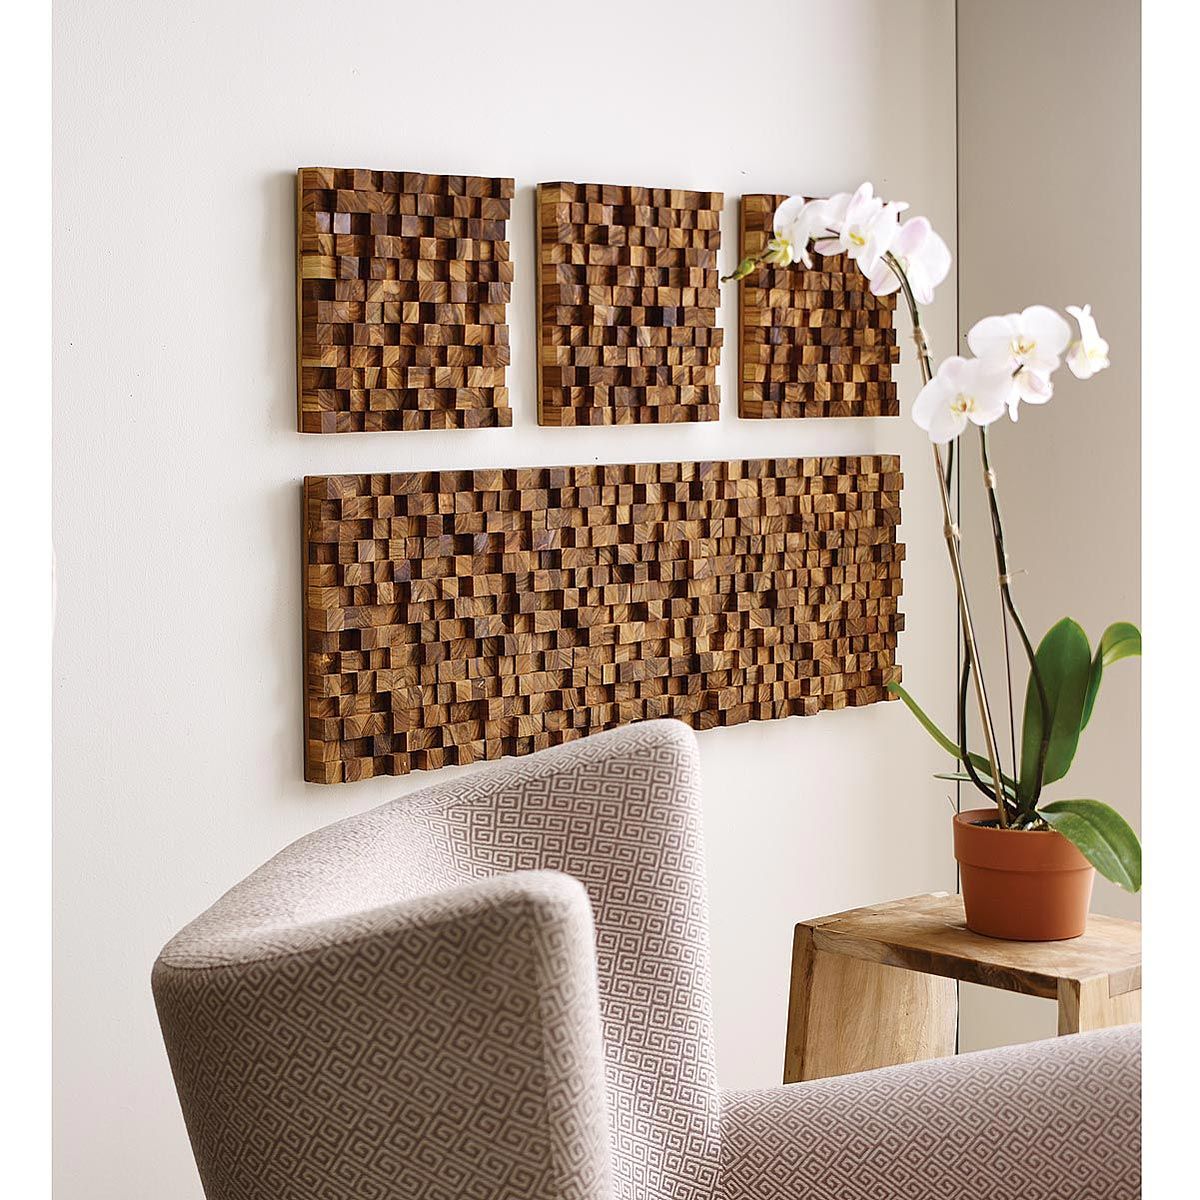 Square Takara Wall Art | Teak Wood, 3d Art | Uncommongoods With Regard To Most Current Square Wall Art (View 5 of 20)